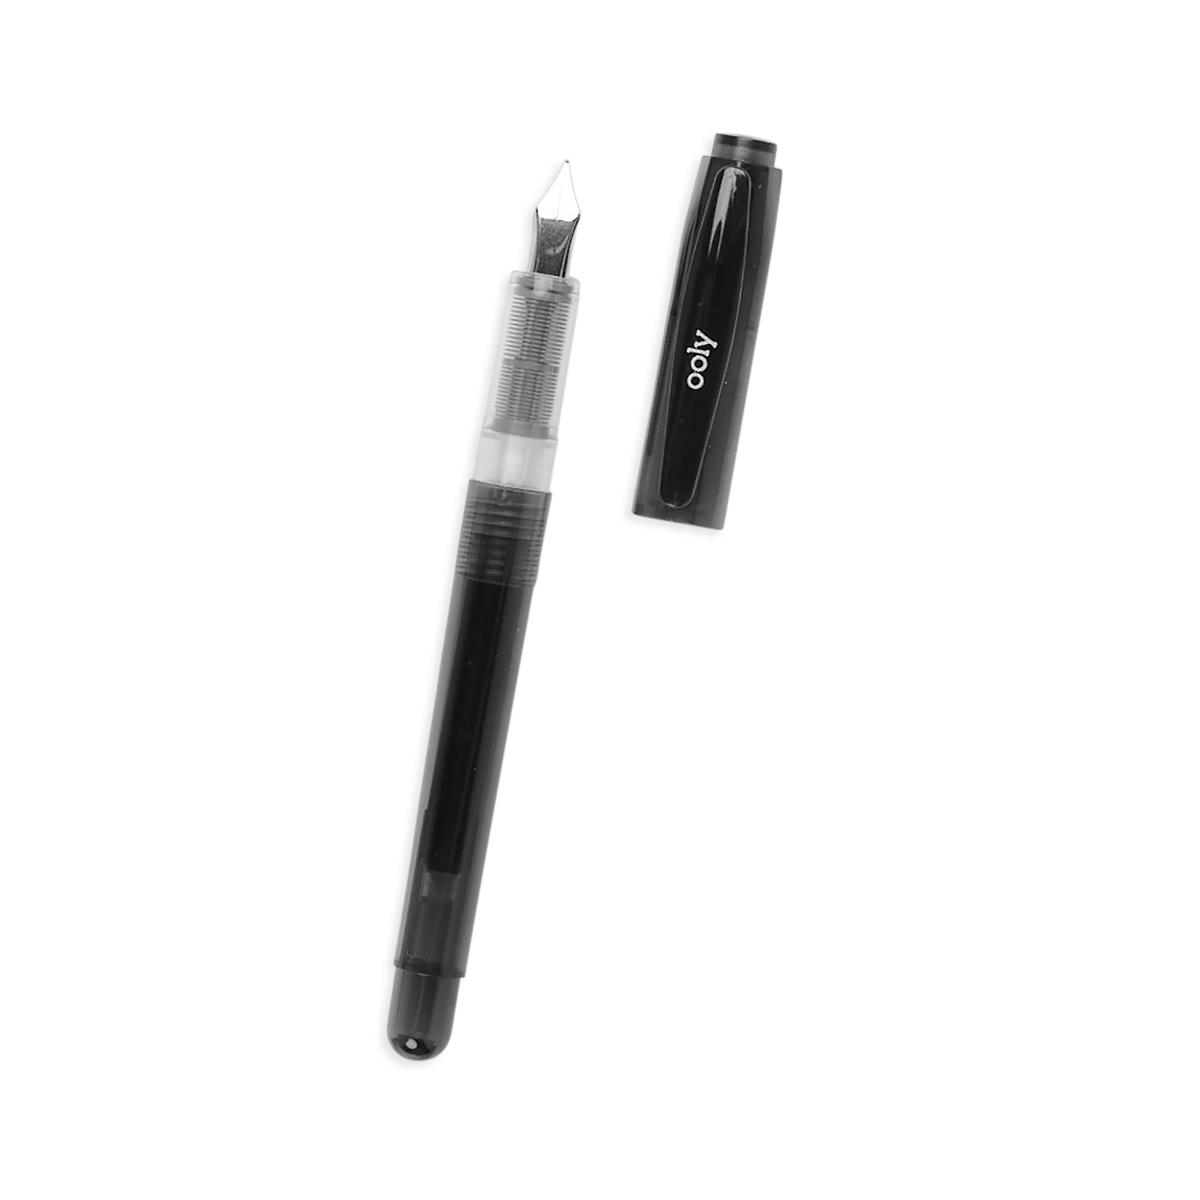 Black ink Splendid Fountain Pen with cap removed at an angle